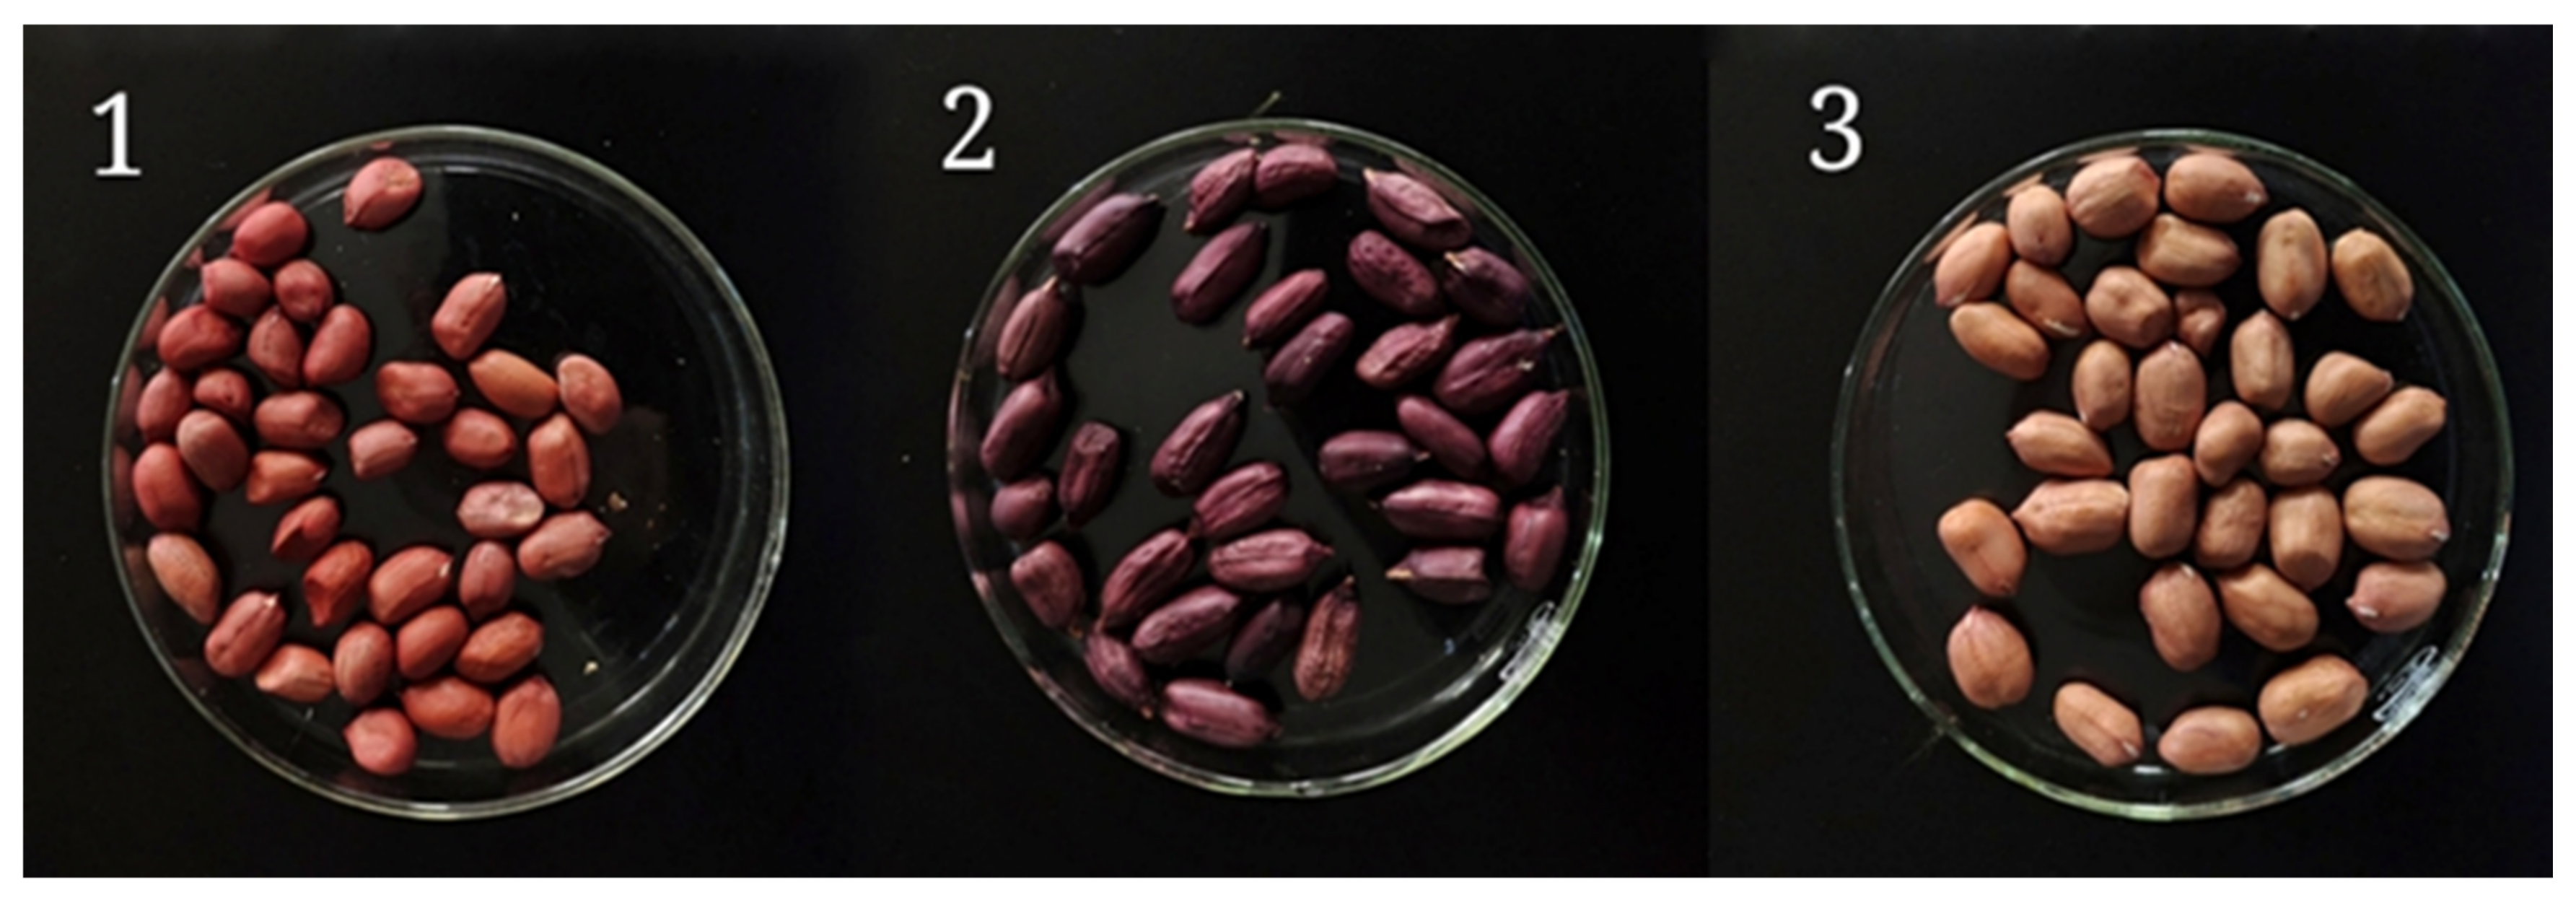 Antioxidants | Free Full-Text | Impact of Germination Time on